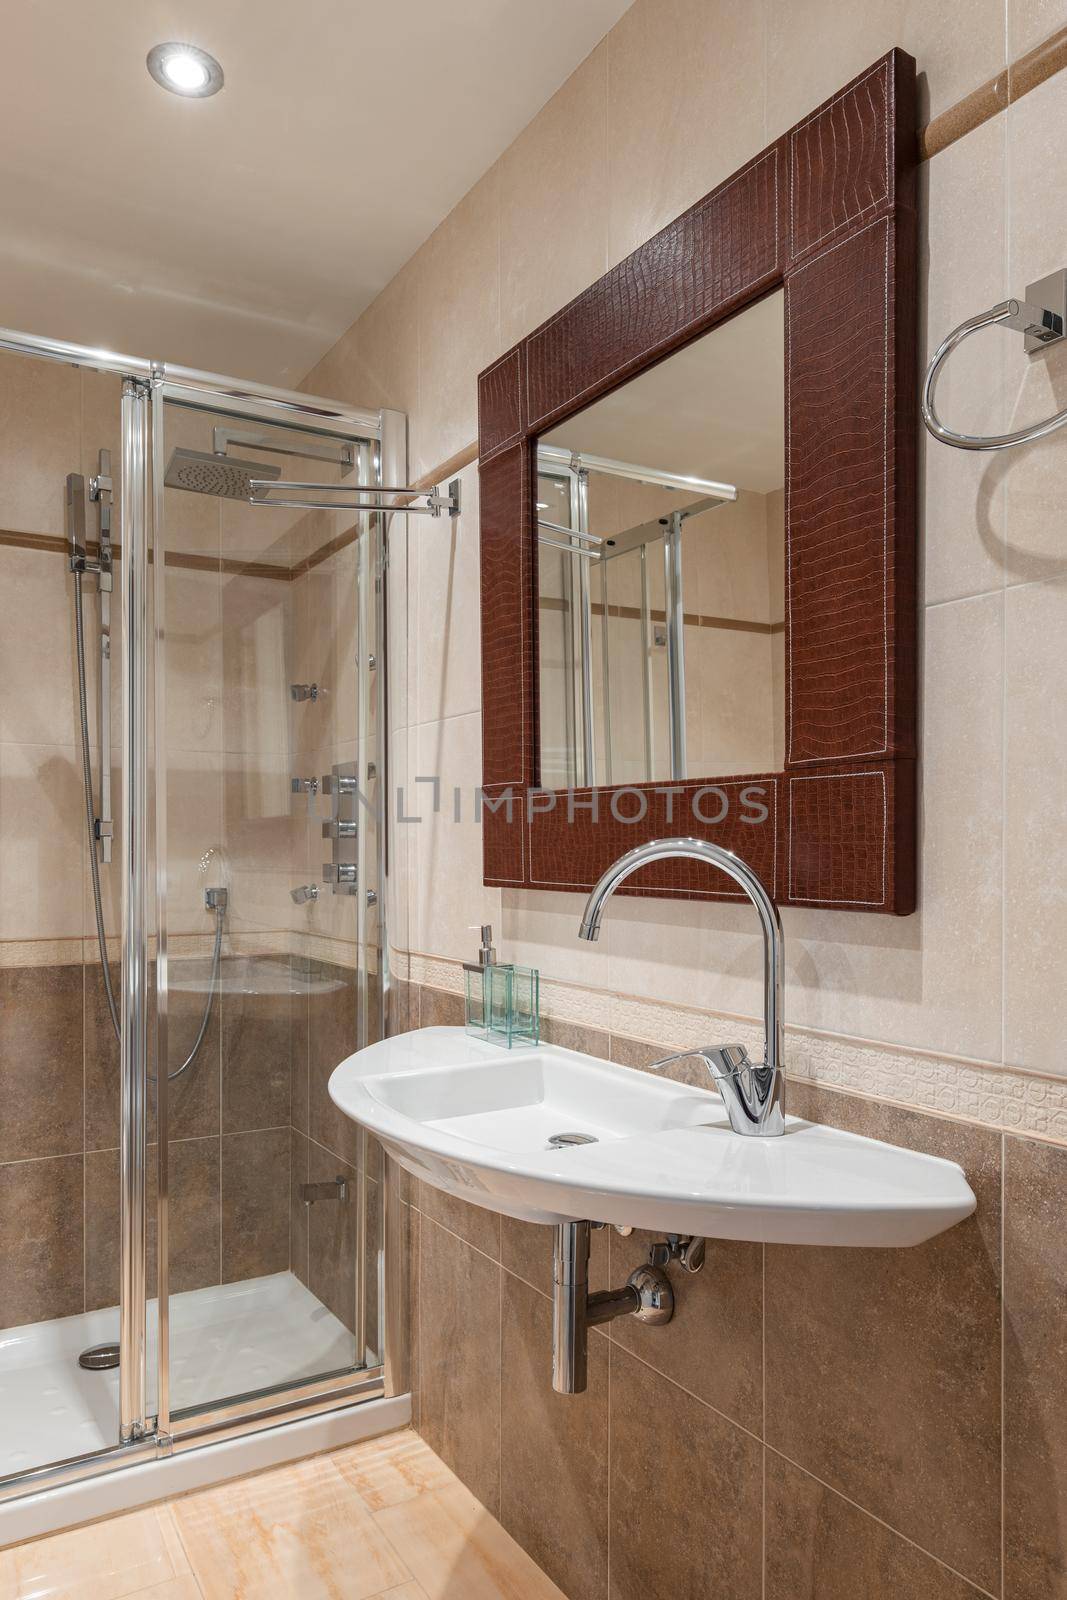 Interior of a new luxury bathroom with a mirror in a leather frame